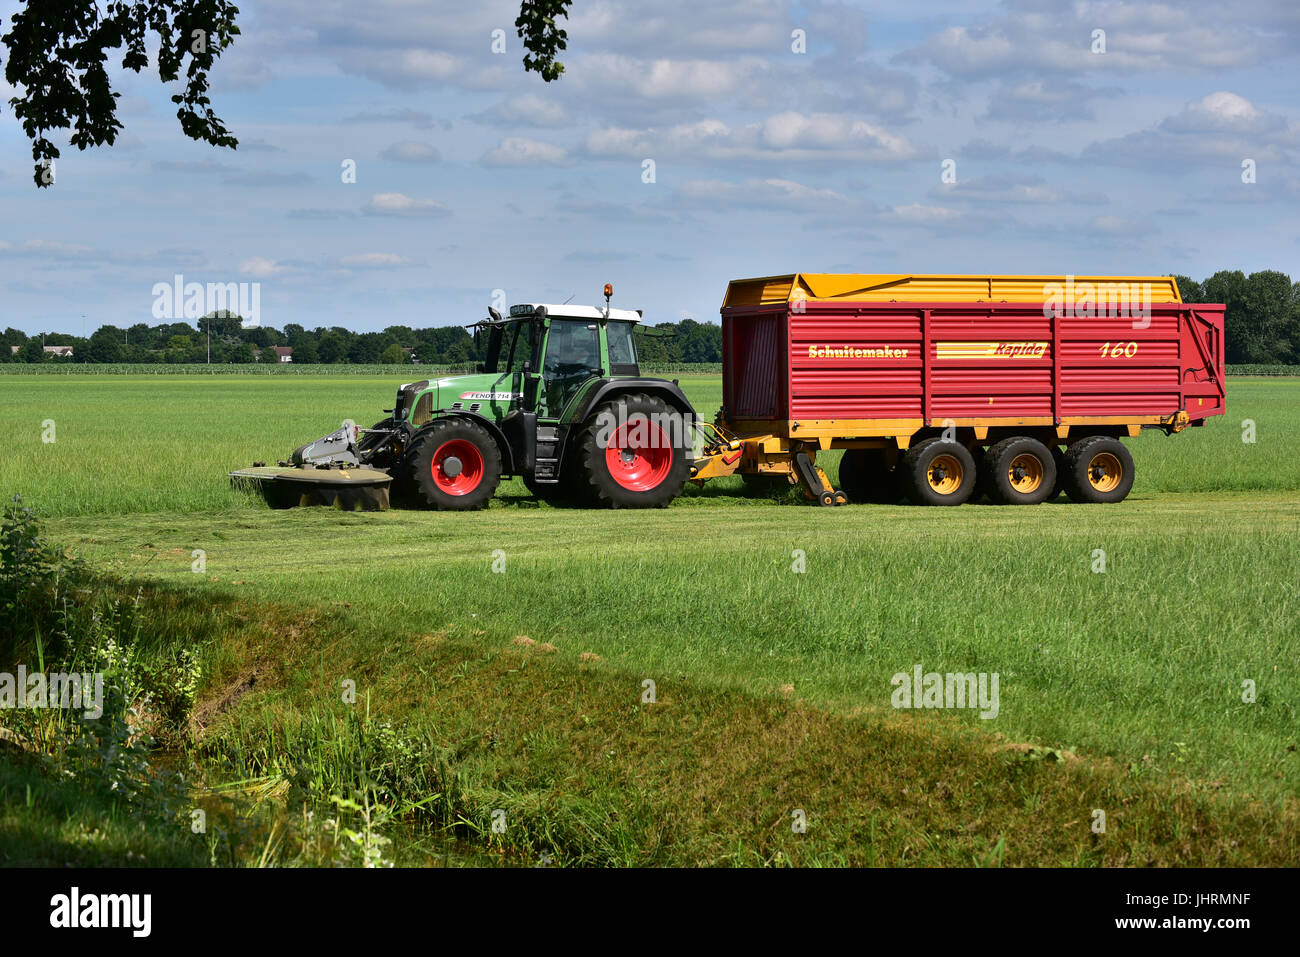 Tractor mowing with Ffront-mounted disc mowers and pulling a self-loading Schuitemaker Forage wagon Stock Photo